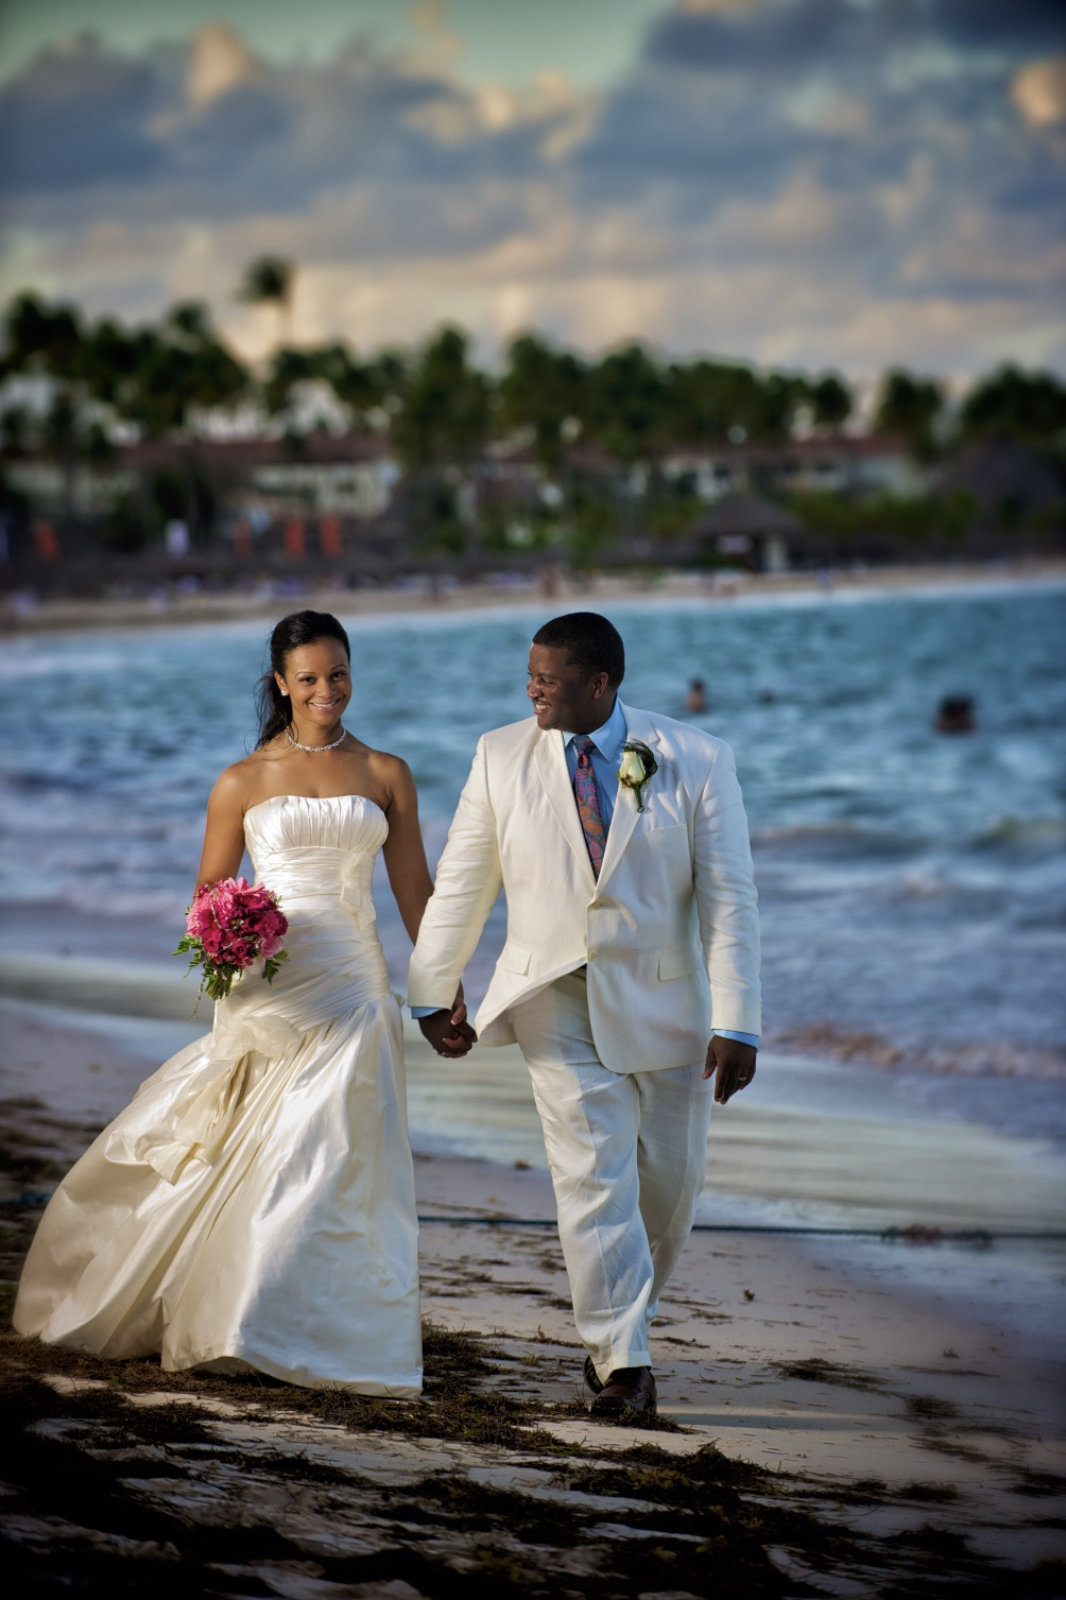 A wedding couple at their destination wedding in the Dominican Republic on the beach